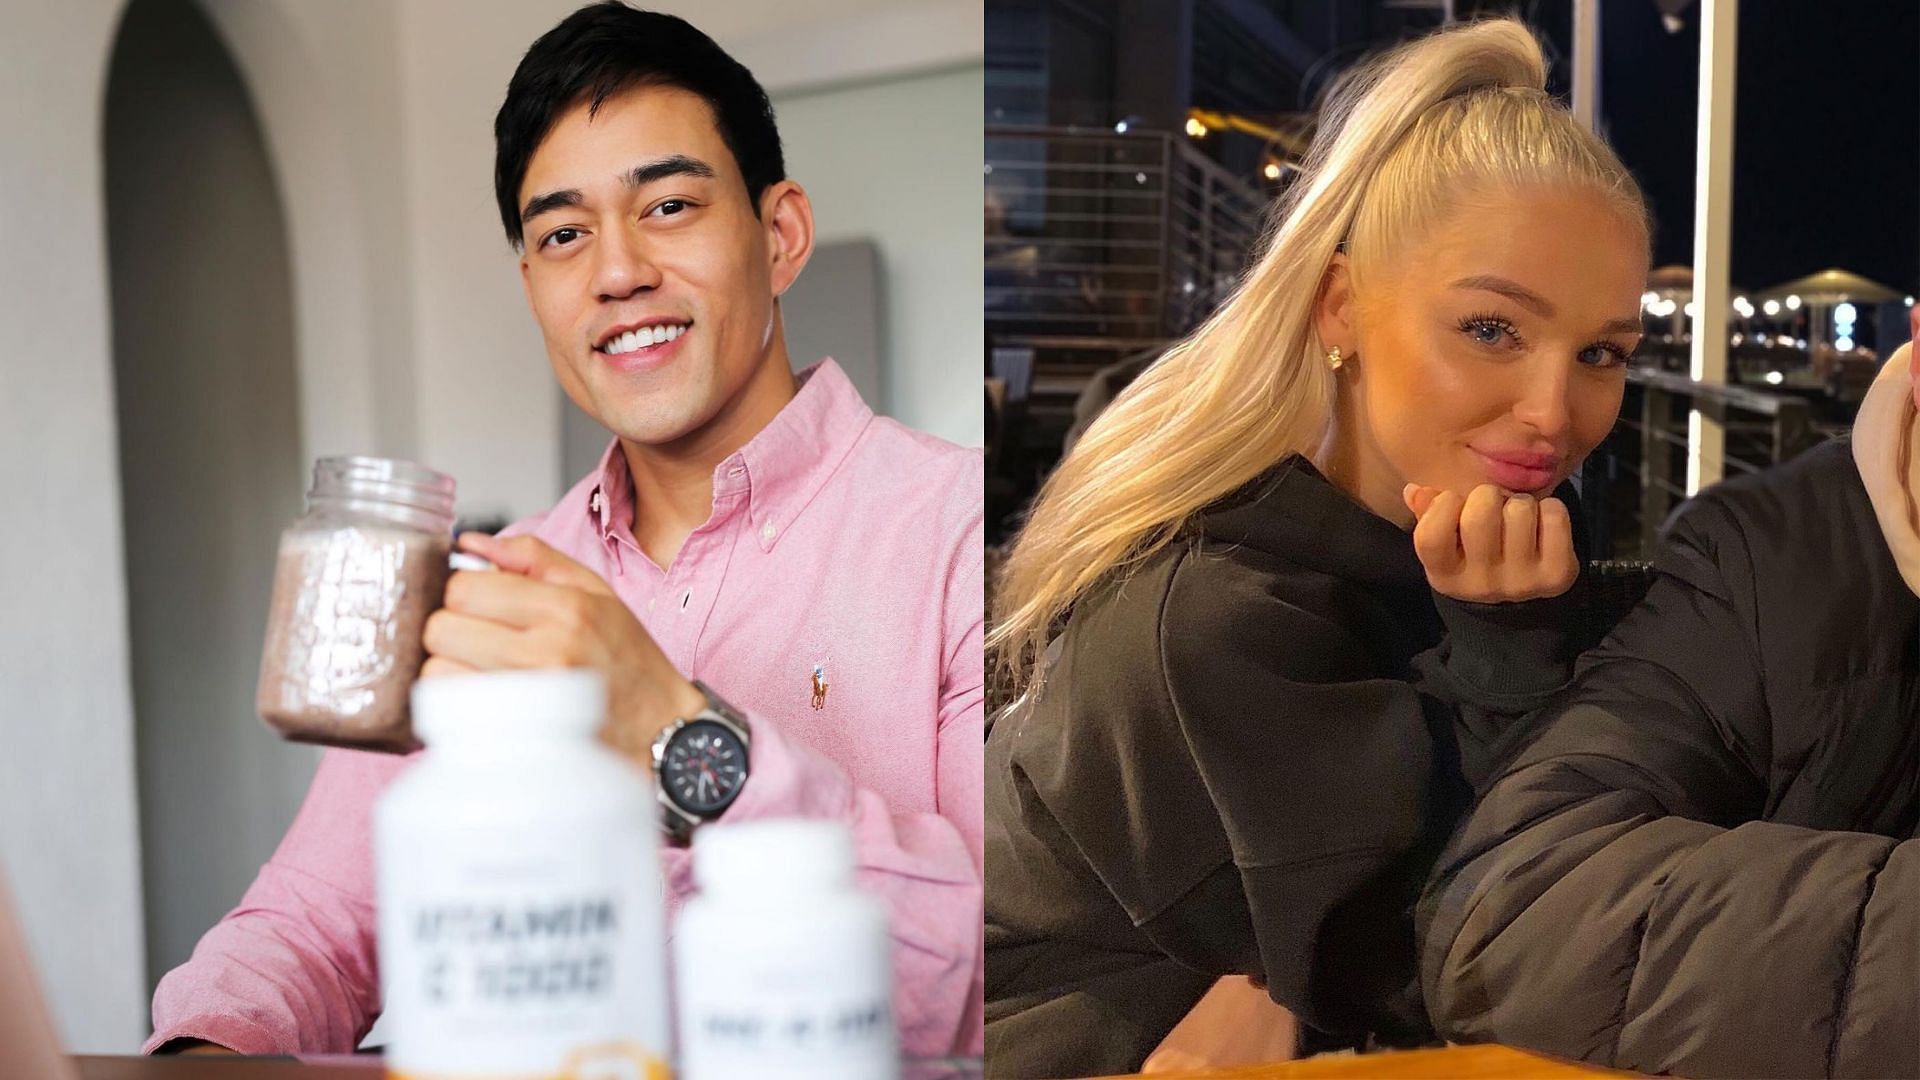 Nam Vo and Emmy Russ to compete in The Challenge as a team